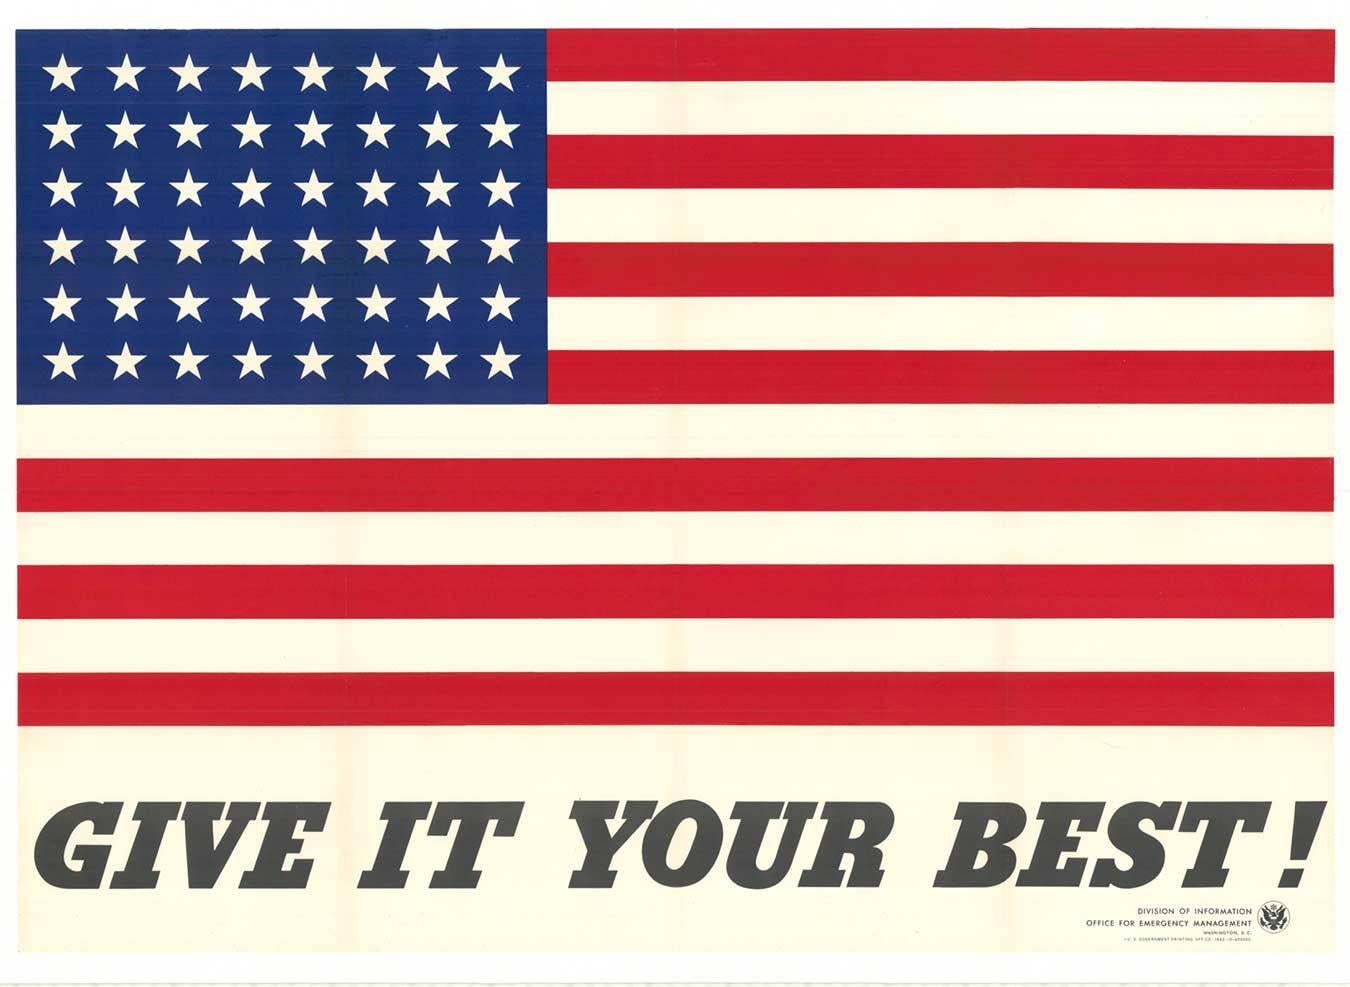 Charles Coiner Figurative Print - Original "Give It Your Best" 48-stars large American flag vintage poster  1942